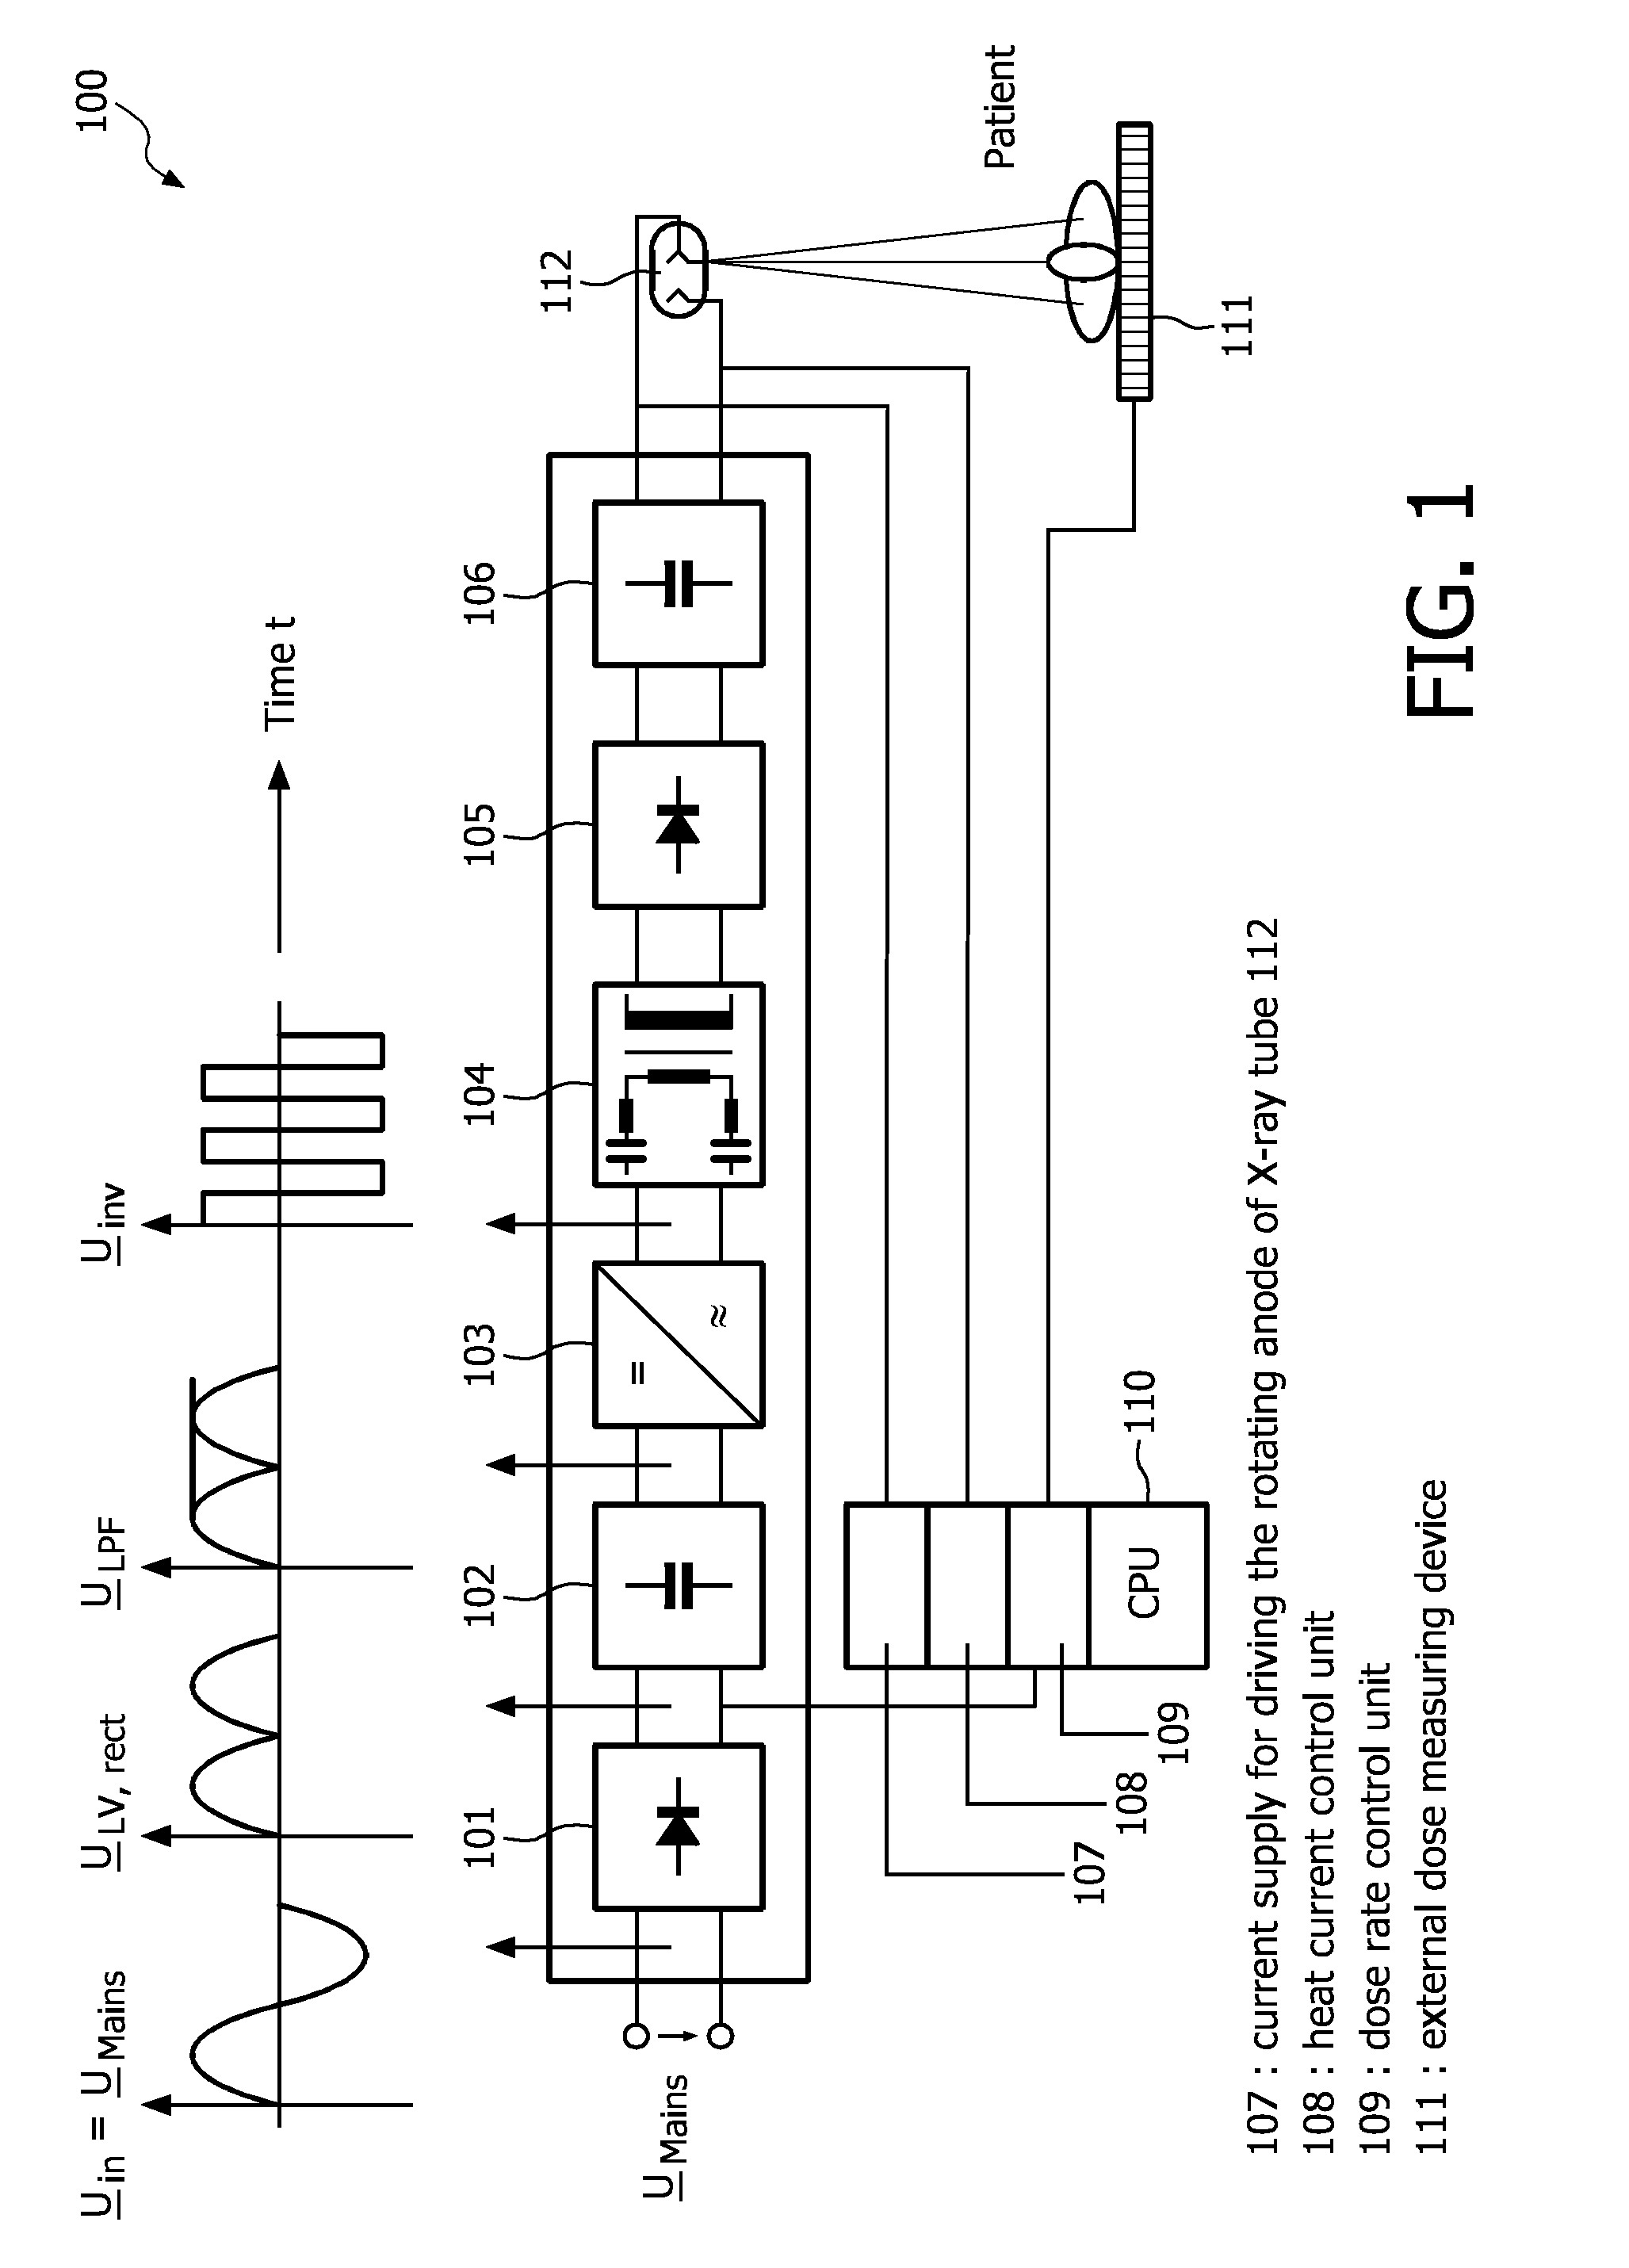 Dc/ac power inverter control unit of a resonant power converter circuit, in particular a dc/dc converter for use in a high-voltage generator circuitry of a modern computed tomography device or x-ray radiographic system